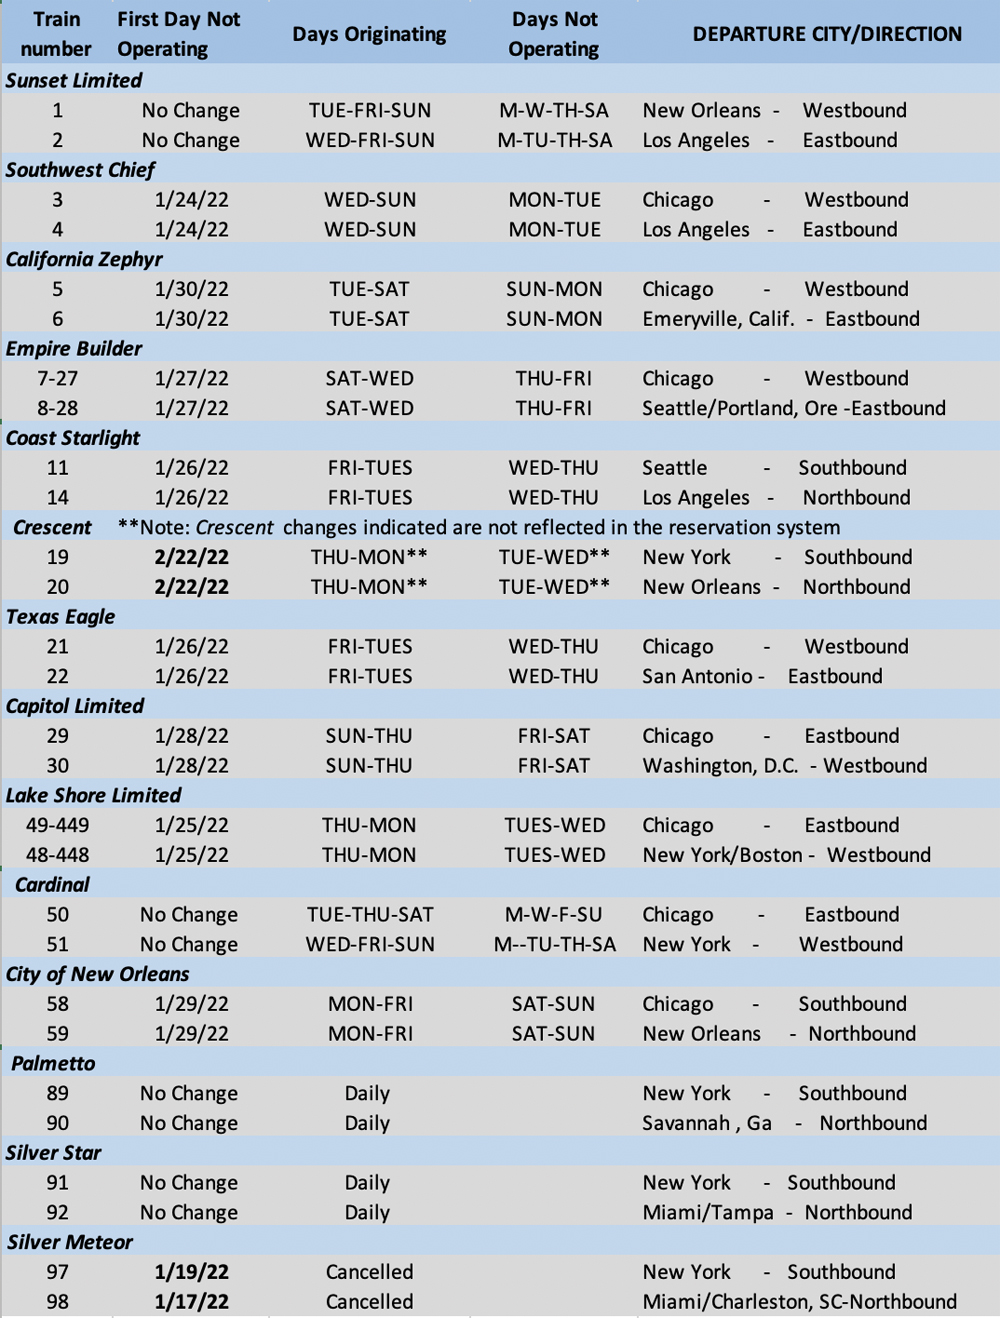 Table showing days of operation for Amtrak long-distance trains